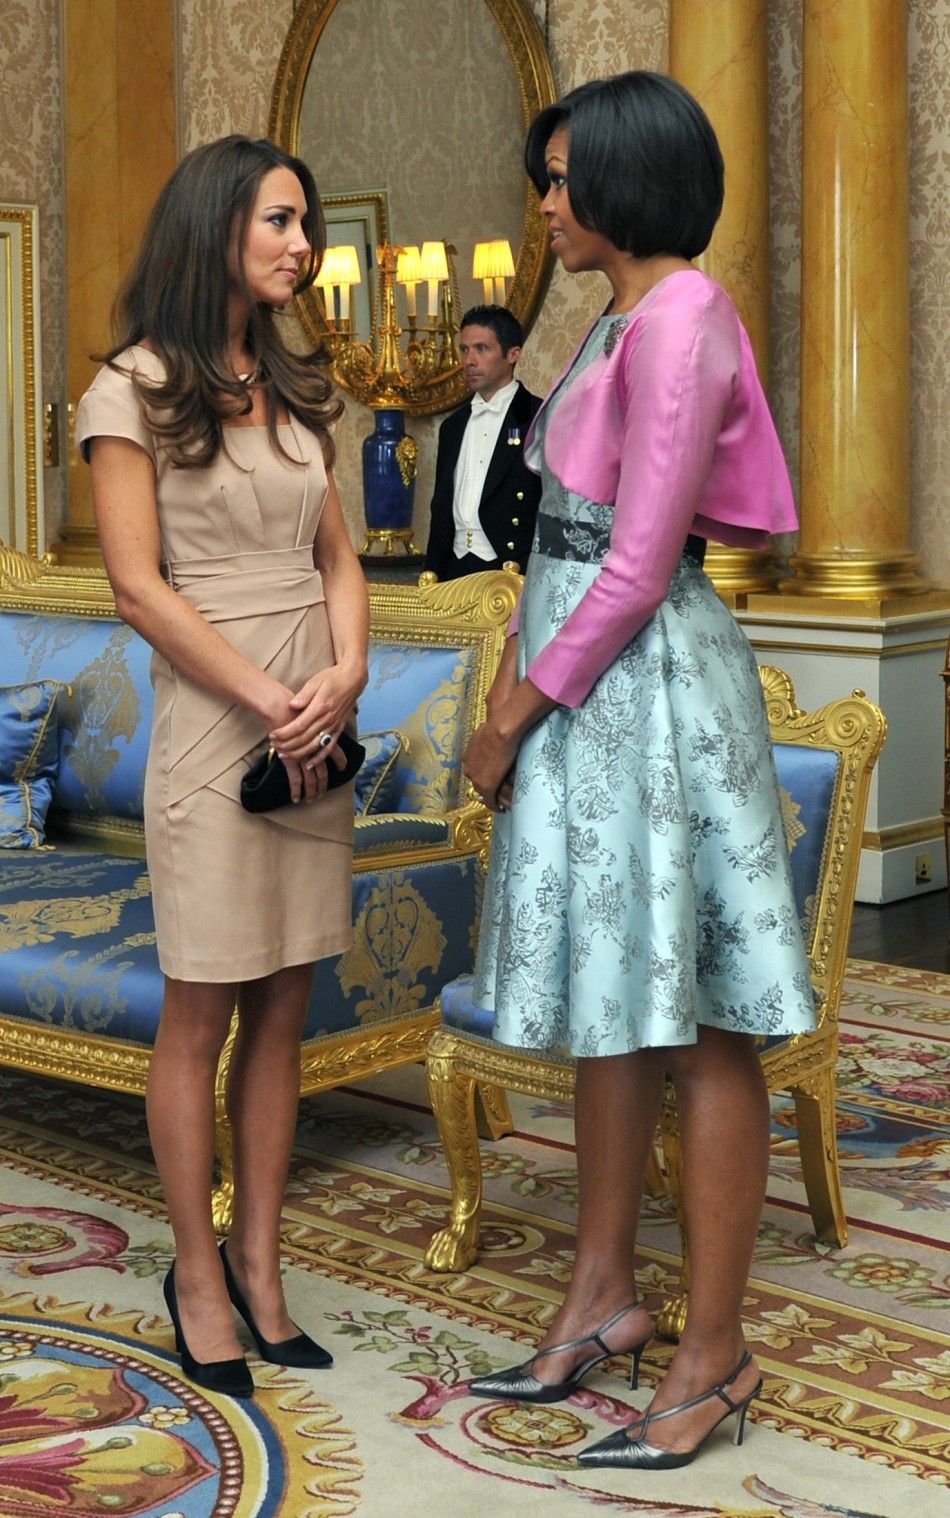 Last years winner, U.S. first lady Michelle Obama speaks with Middleton 